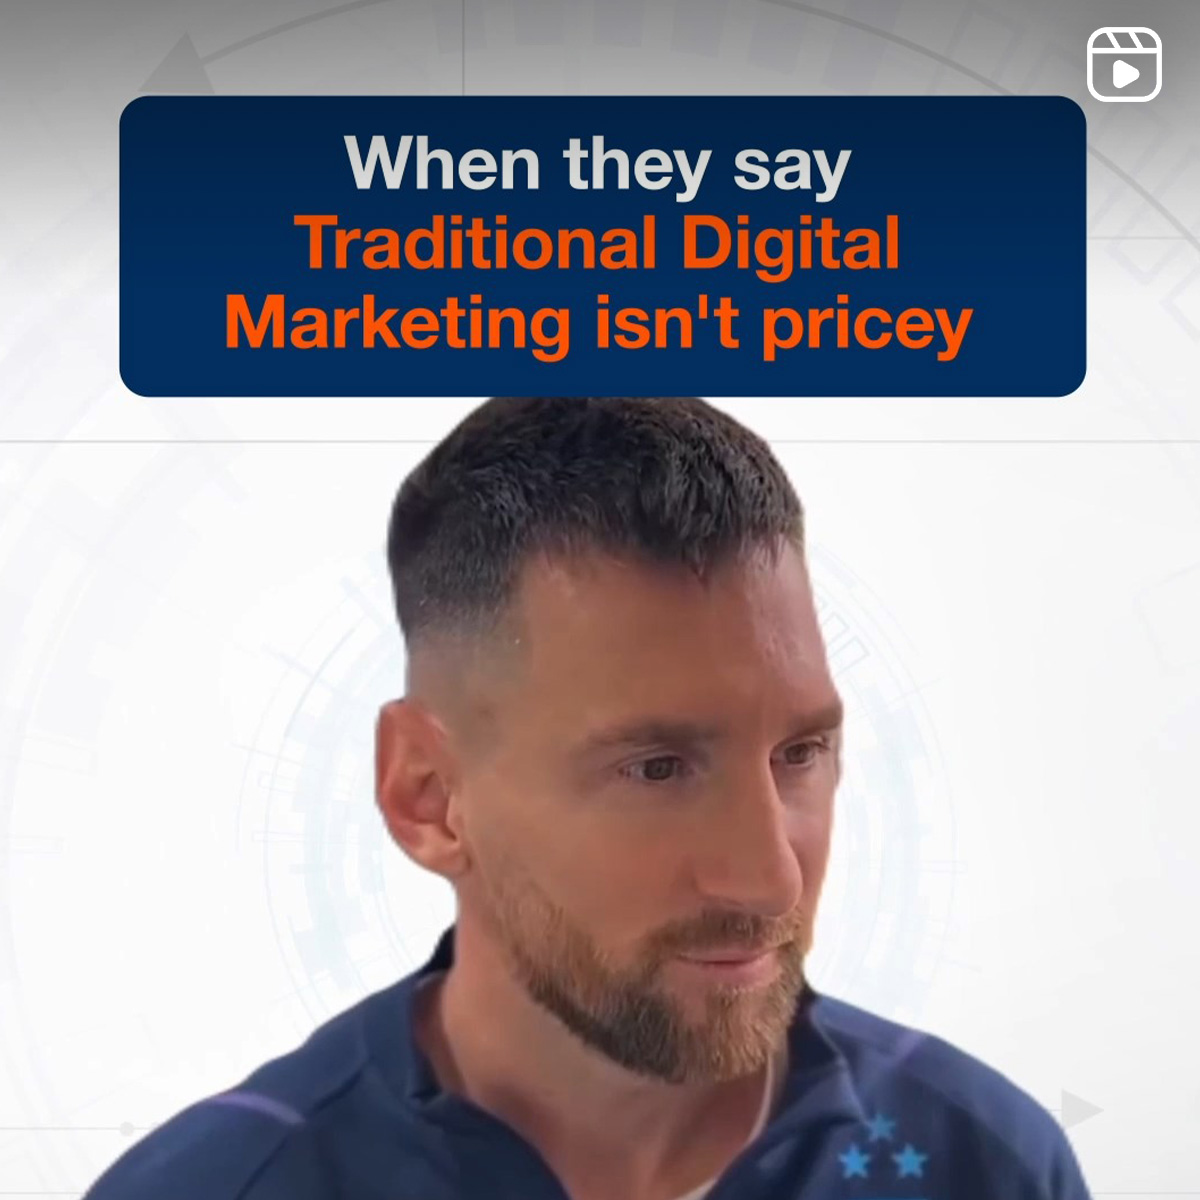 When they say Traditional Digital Marketing isn't pricey